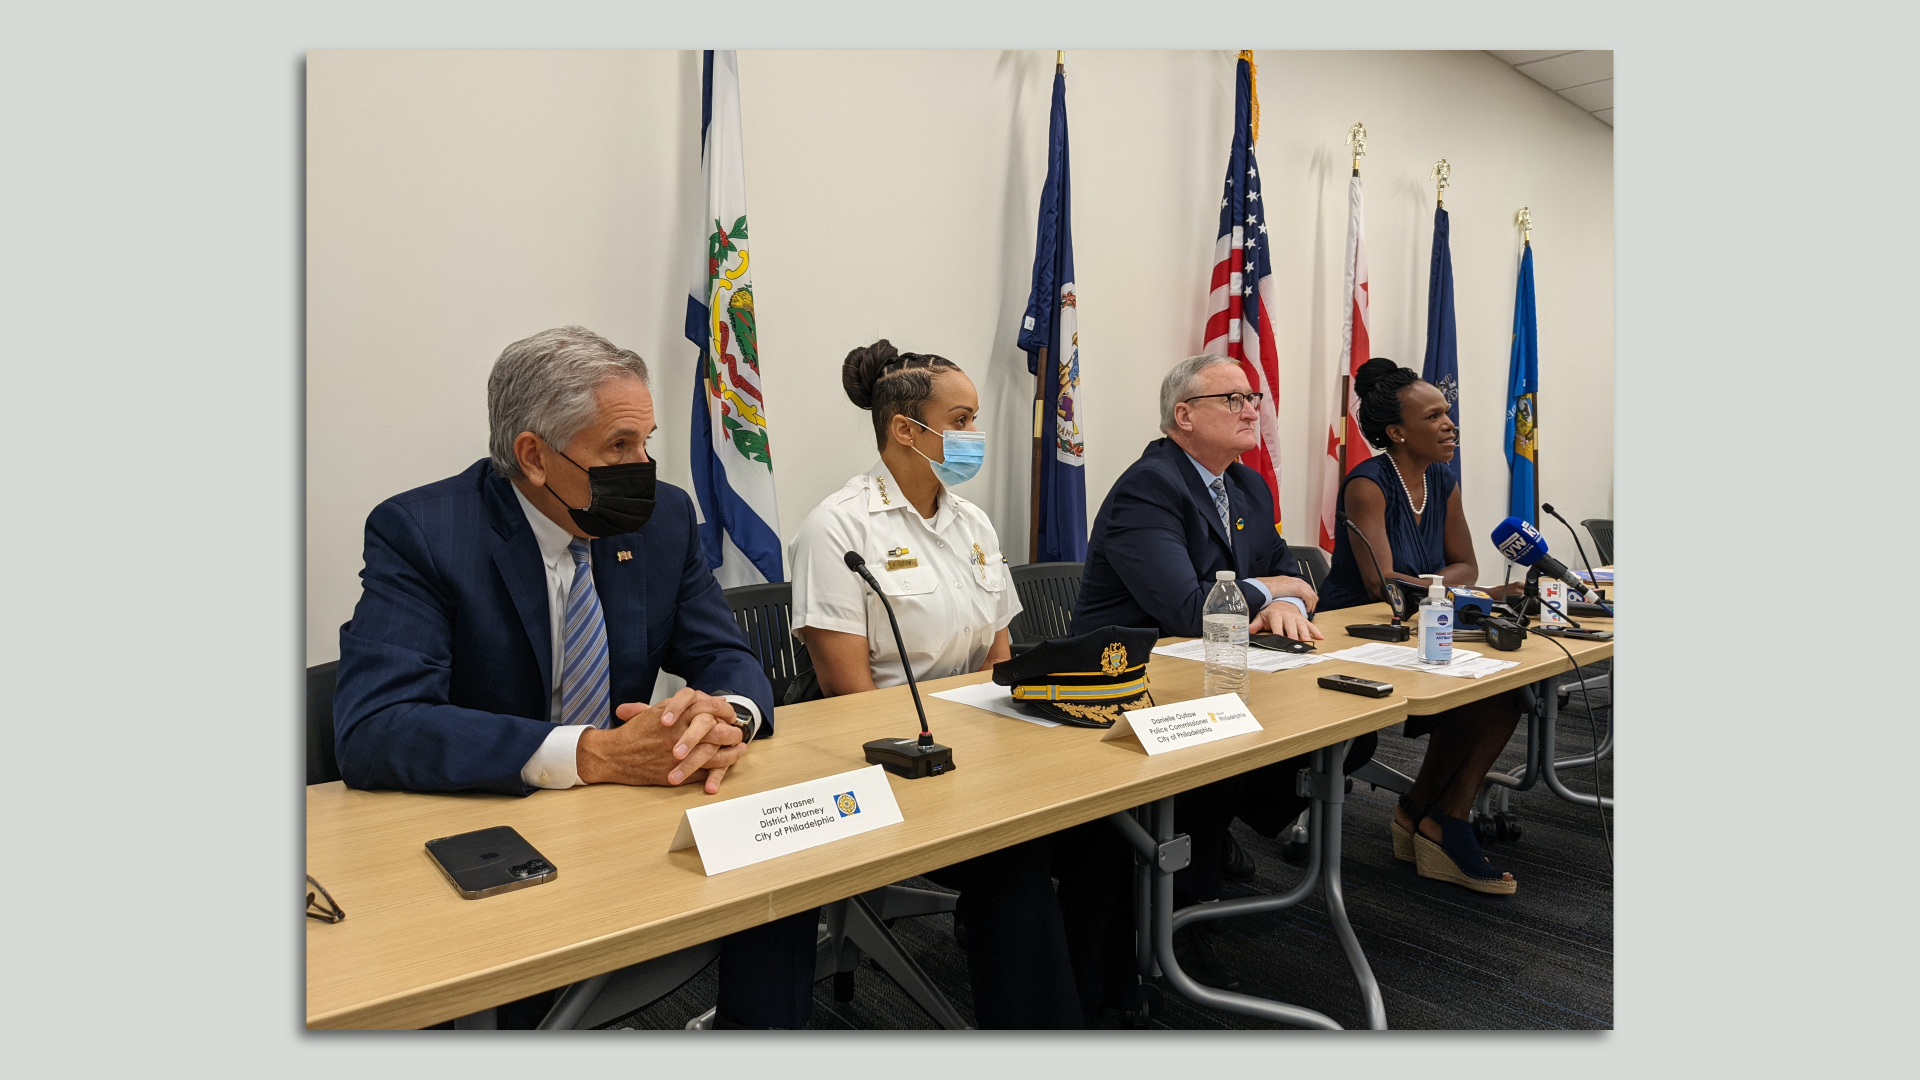 District Attorney Larry Krasner, police commissioner Danielle Outlaw, Mayor Jim Kenney and Ala Stanford, regional director for Department of Health and Human Services Region 3. 